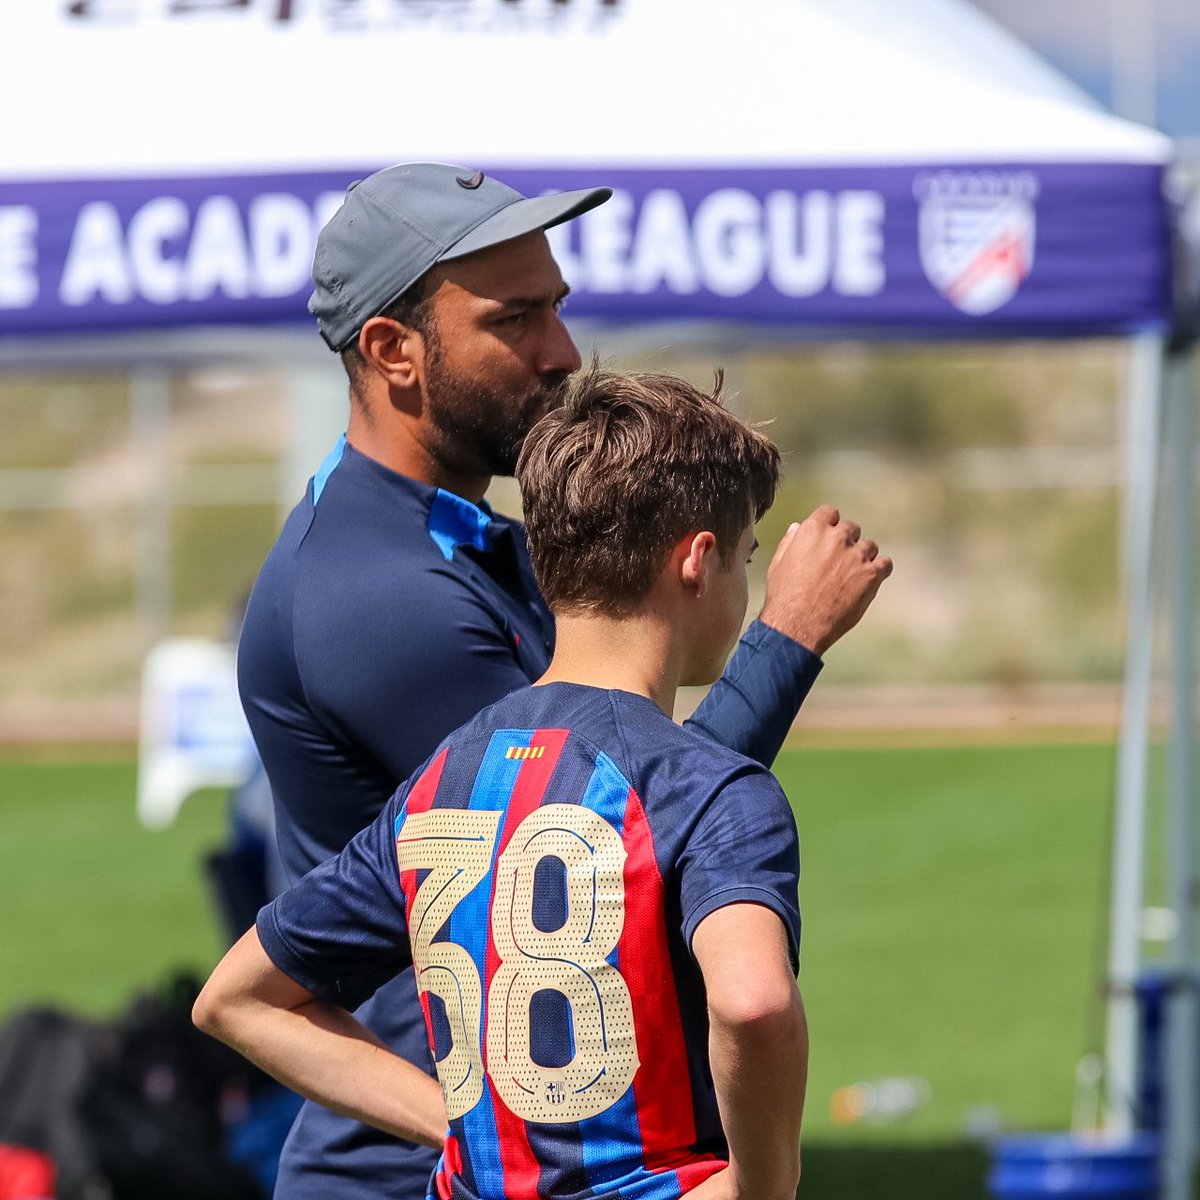 Congratulations to our very own, Coach Mauricio, who was selected to coach the 2008 @EliteAcademyL National Talent ID team at the EA @MicFootball Cup in Barcelona, Spain this week! 👏🇪🇸 #BarçaResidencyAcademy #EATalentID #EATalentIDMIC24